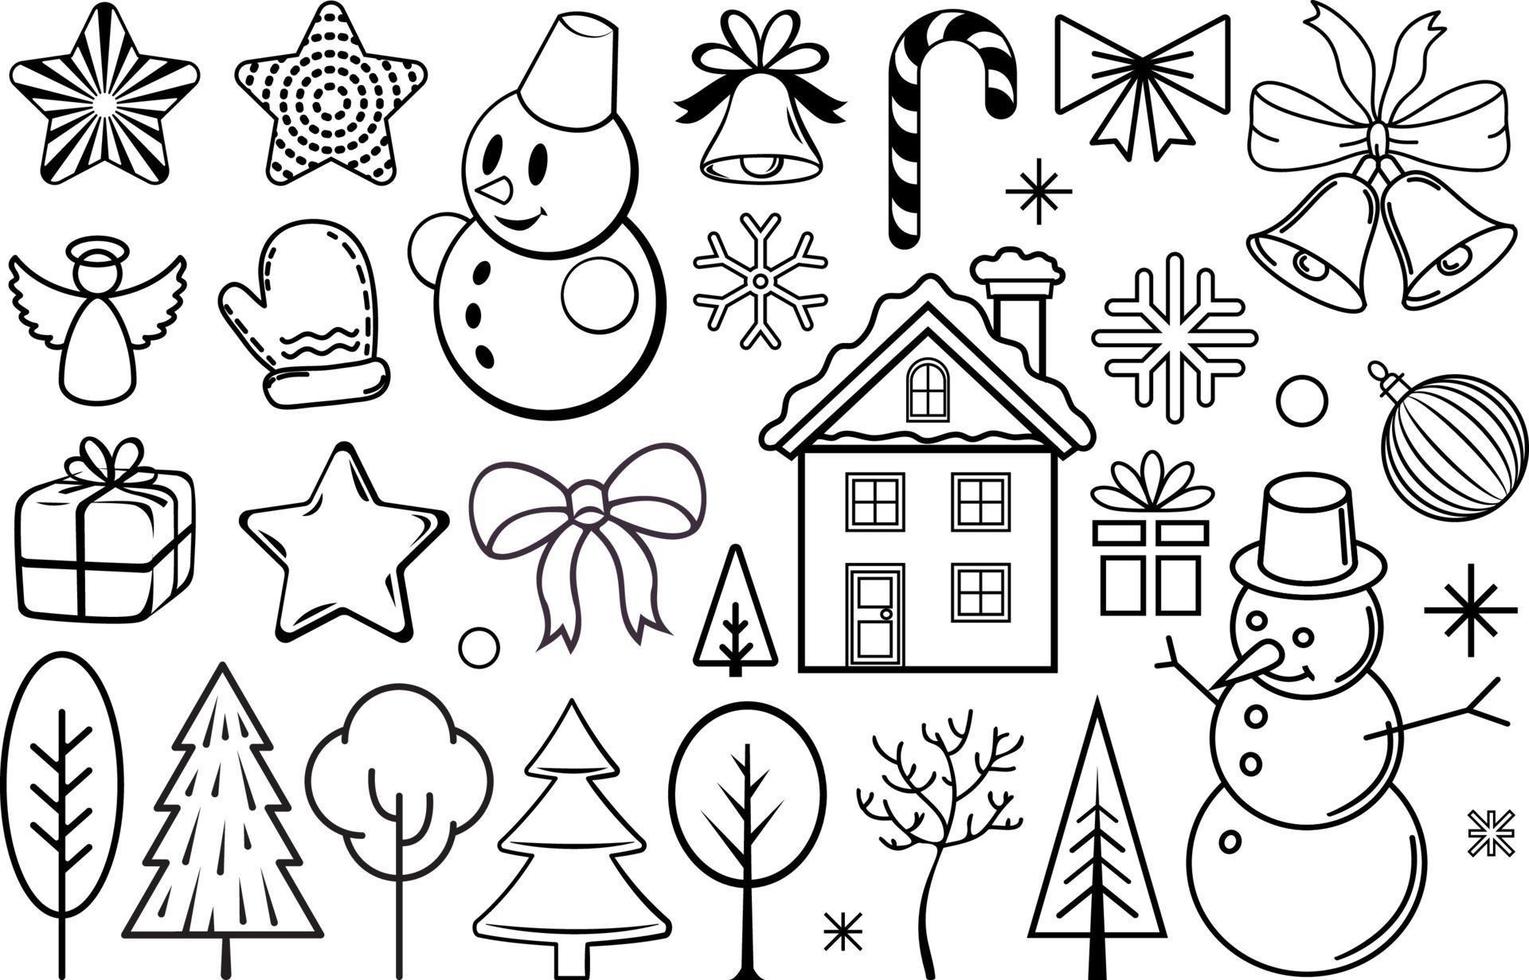 Christmas design elements. Christmas decorations and illustration set. Decorative ornaments and icons for your design projects as flyers, banners, postcards, posters, greeting cards, invitations etc. vector